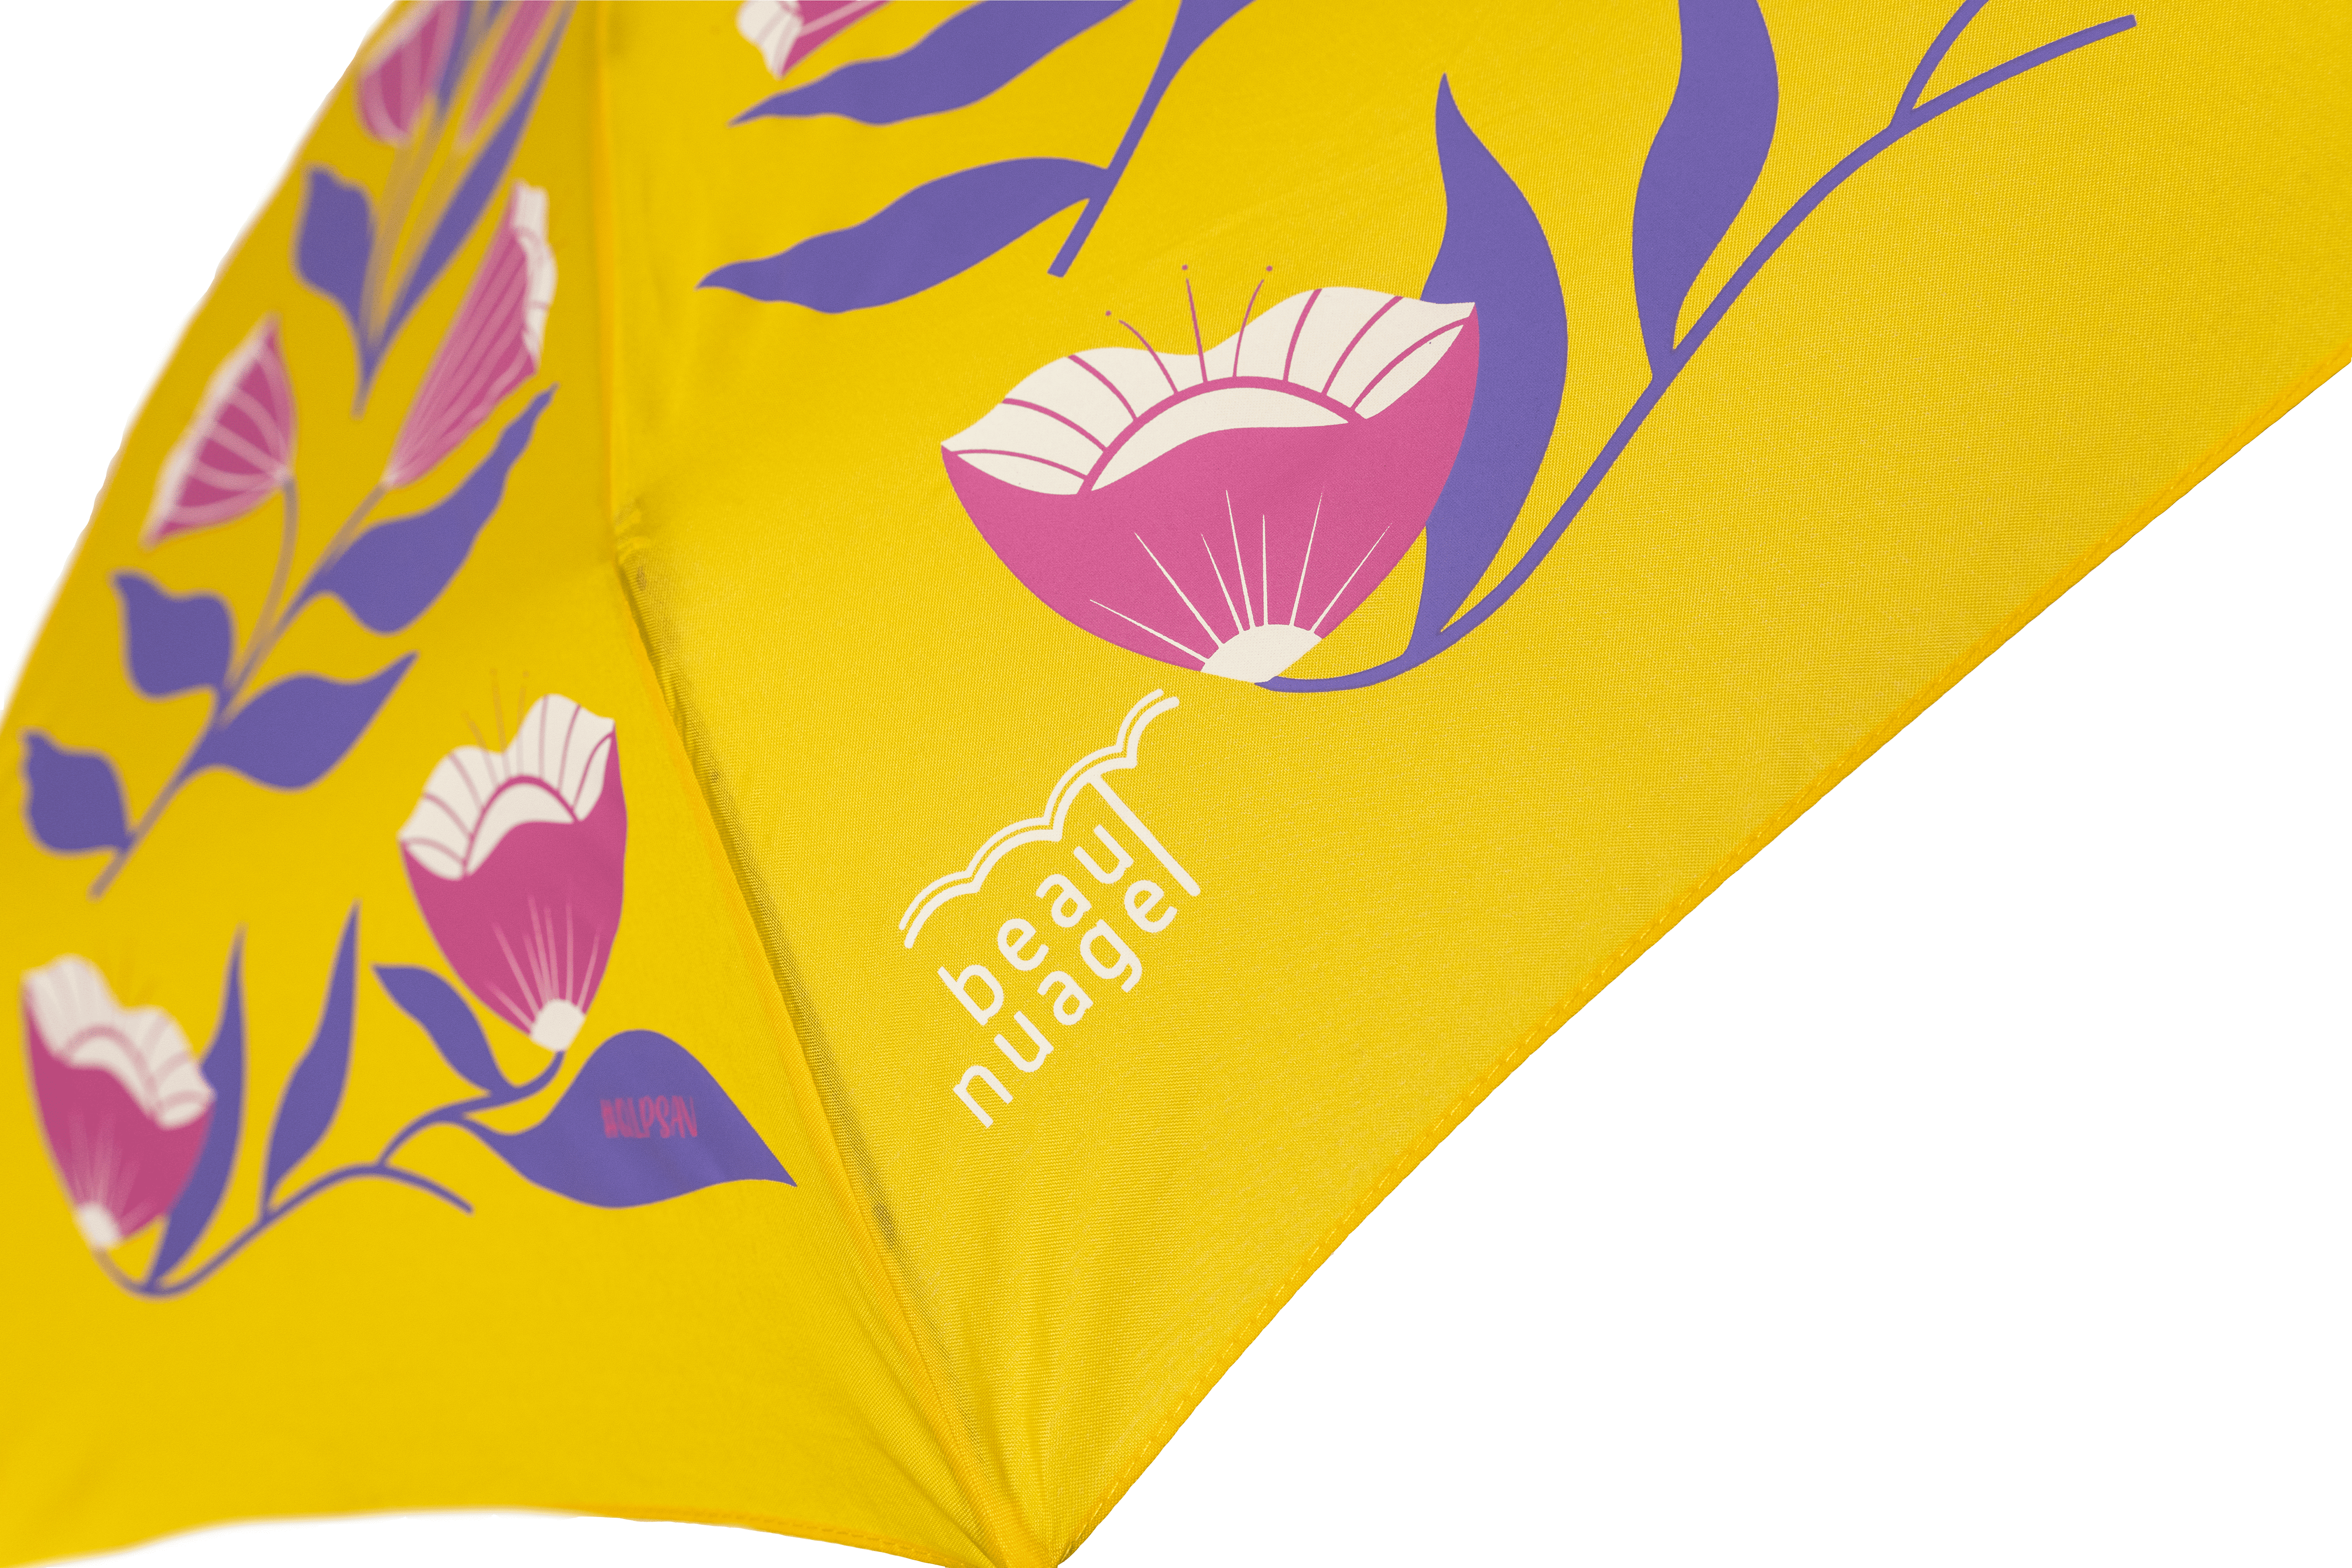 yellow umbrella with pink flowers on the canopy